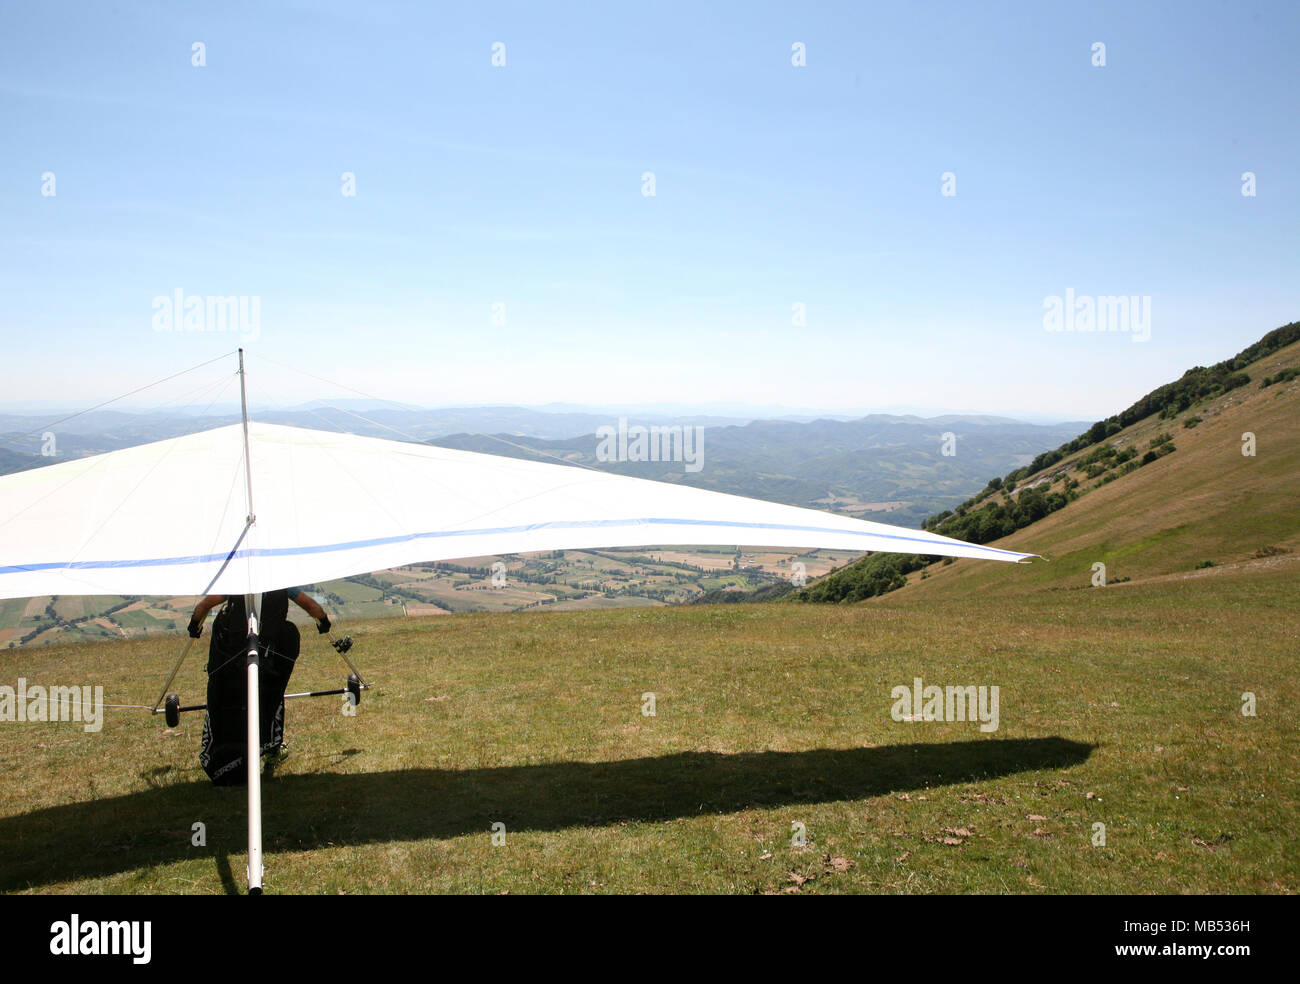 Hang glider taking off Stock Photo